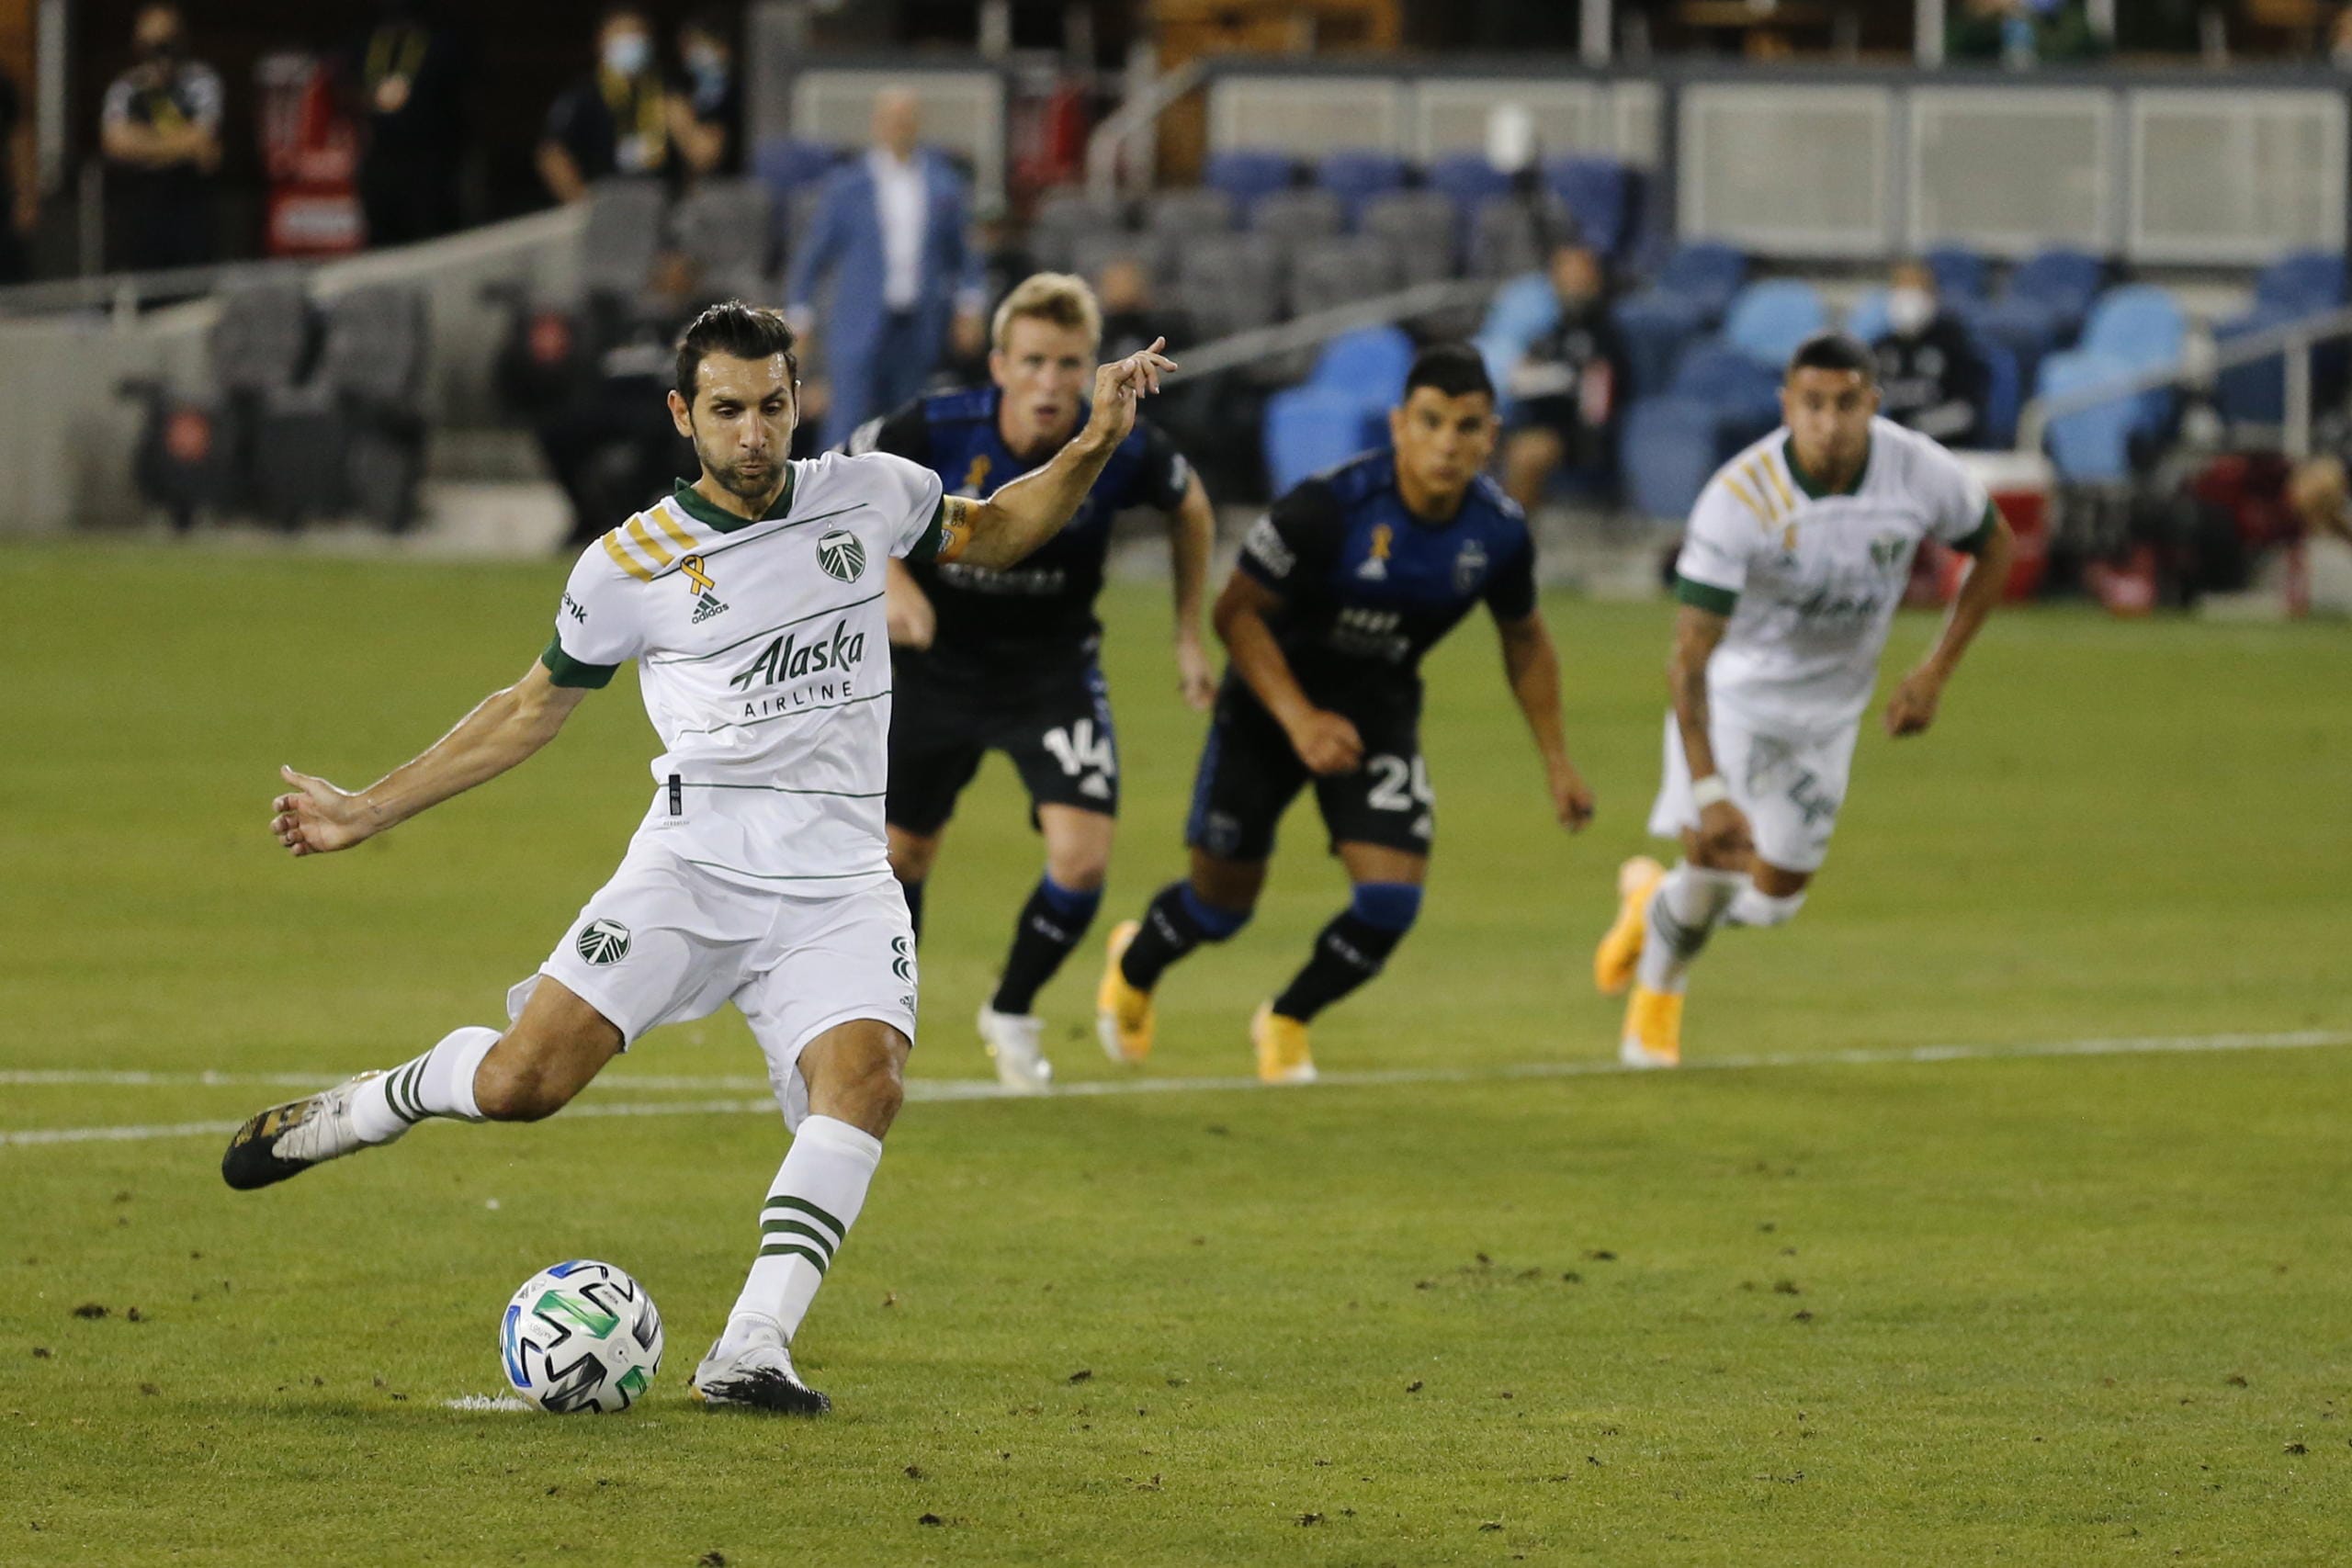 Portland Timbers midfielder Diego Valeri (8) kicks a penalty shot against San Jose Earthquakes during the first half of an MLS soccer match Saturday, Sept. 19, 2020, in San Jose, Calif.